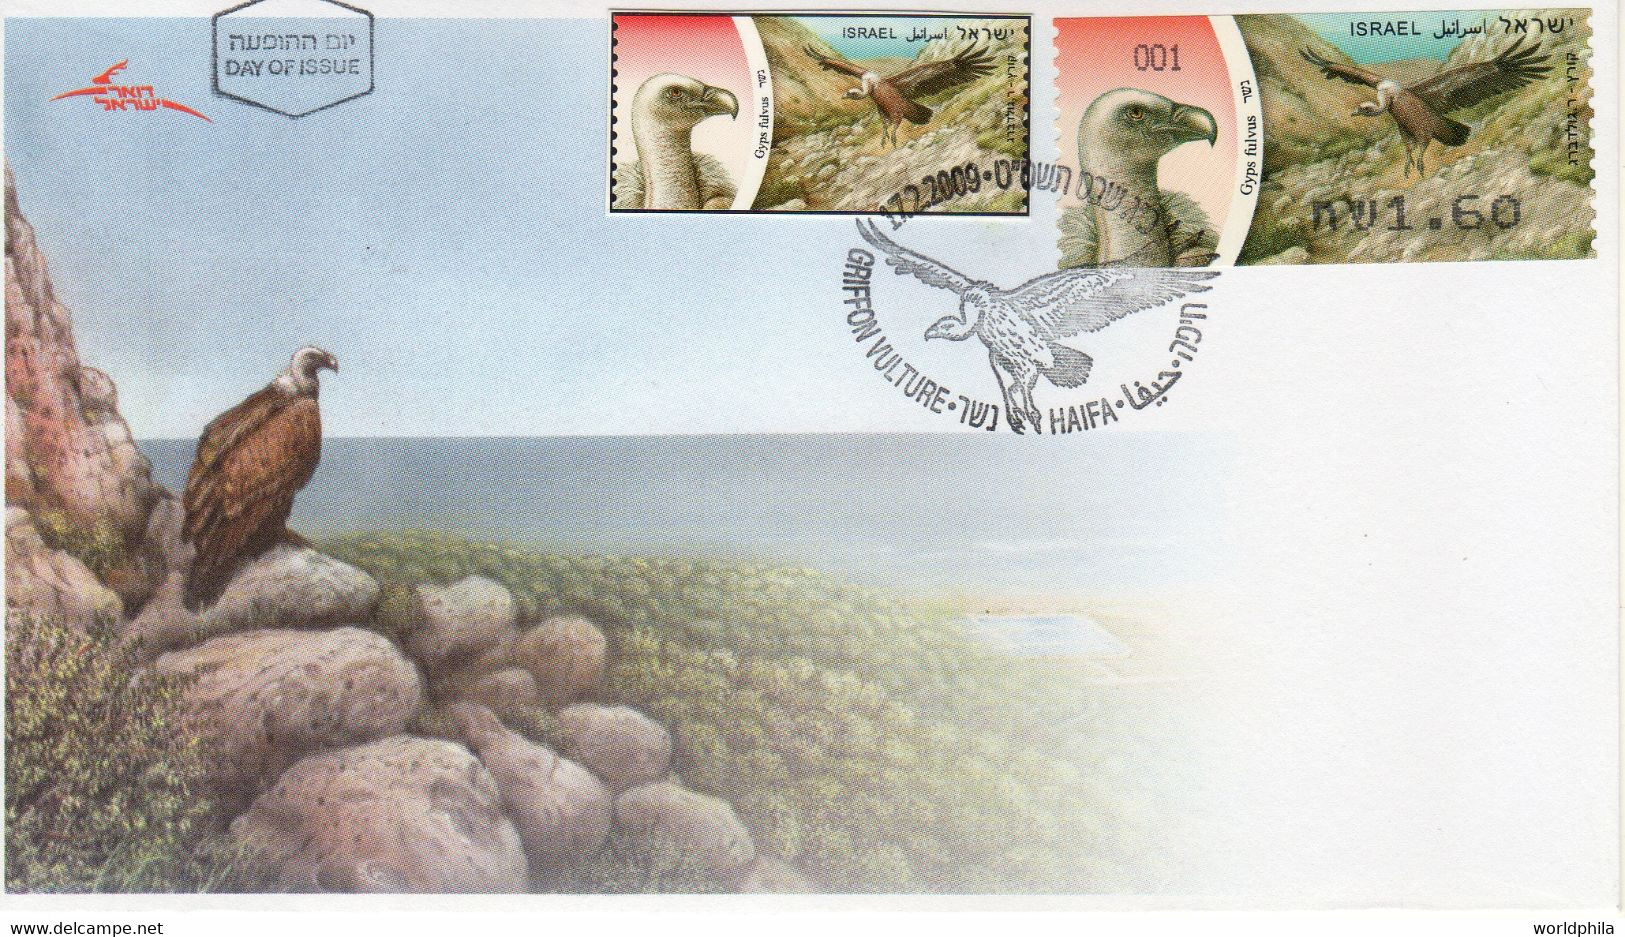 Israel 2009 Extremely Rare Eagle Bird, ATM Stamp, Designer Photo Proof, Essay+regular FDC 8 - Imperforates, Proofs & Errors